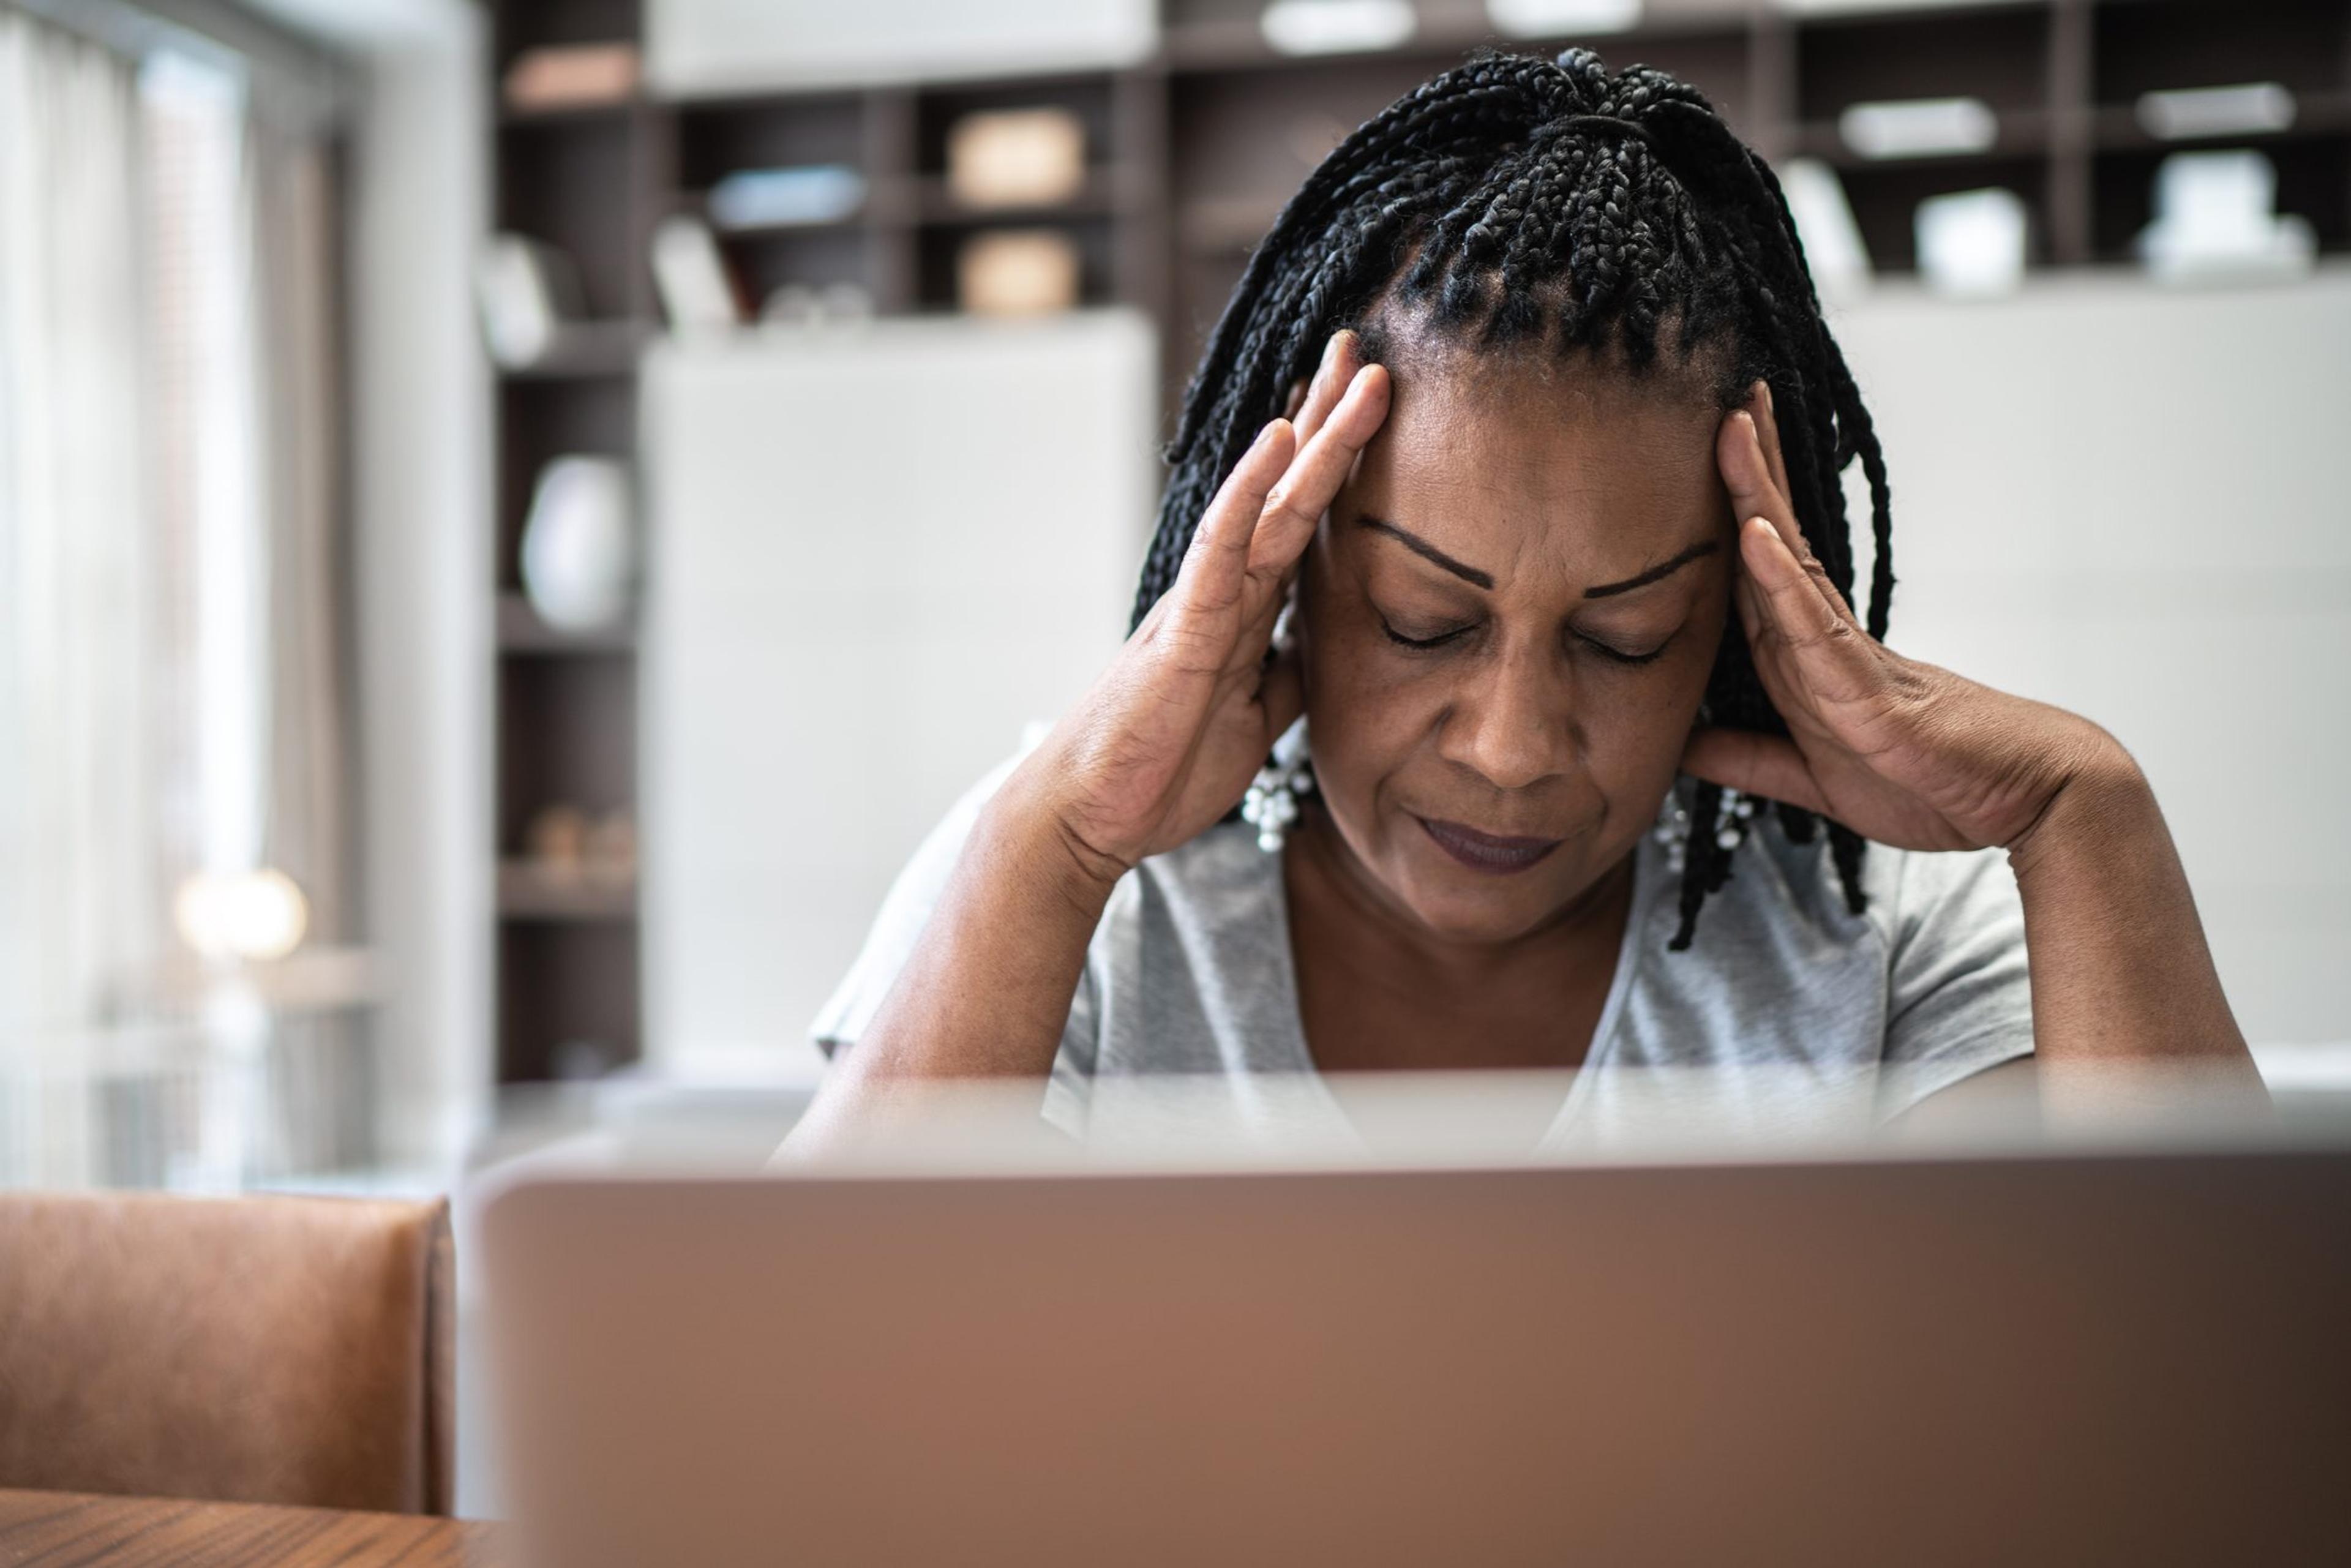 Stress is a signal that warns you of sudden or imminent danger. When it comes to life or death situations, it is crucial to our survival. But stress shouldn’t be a chronic condition.